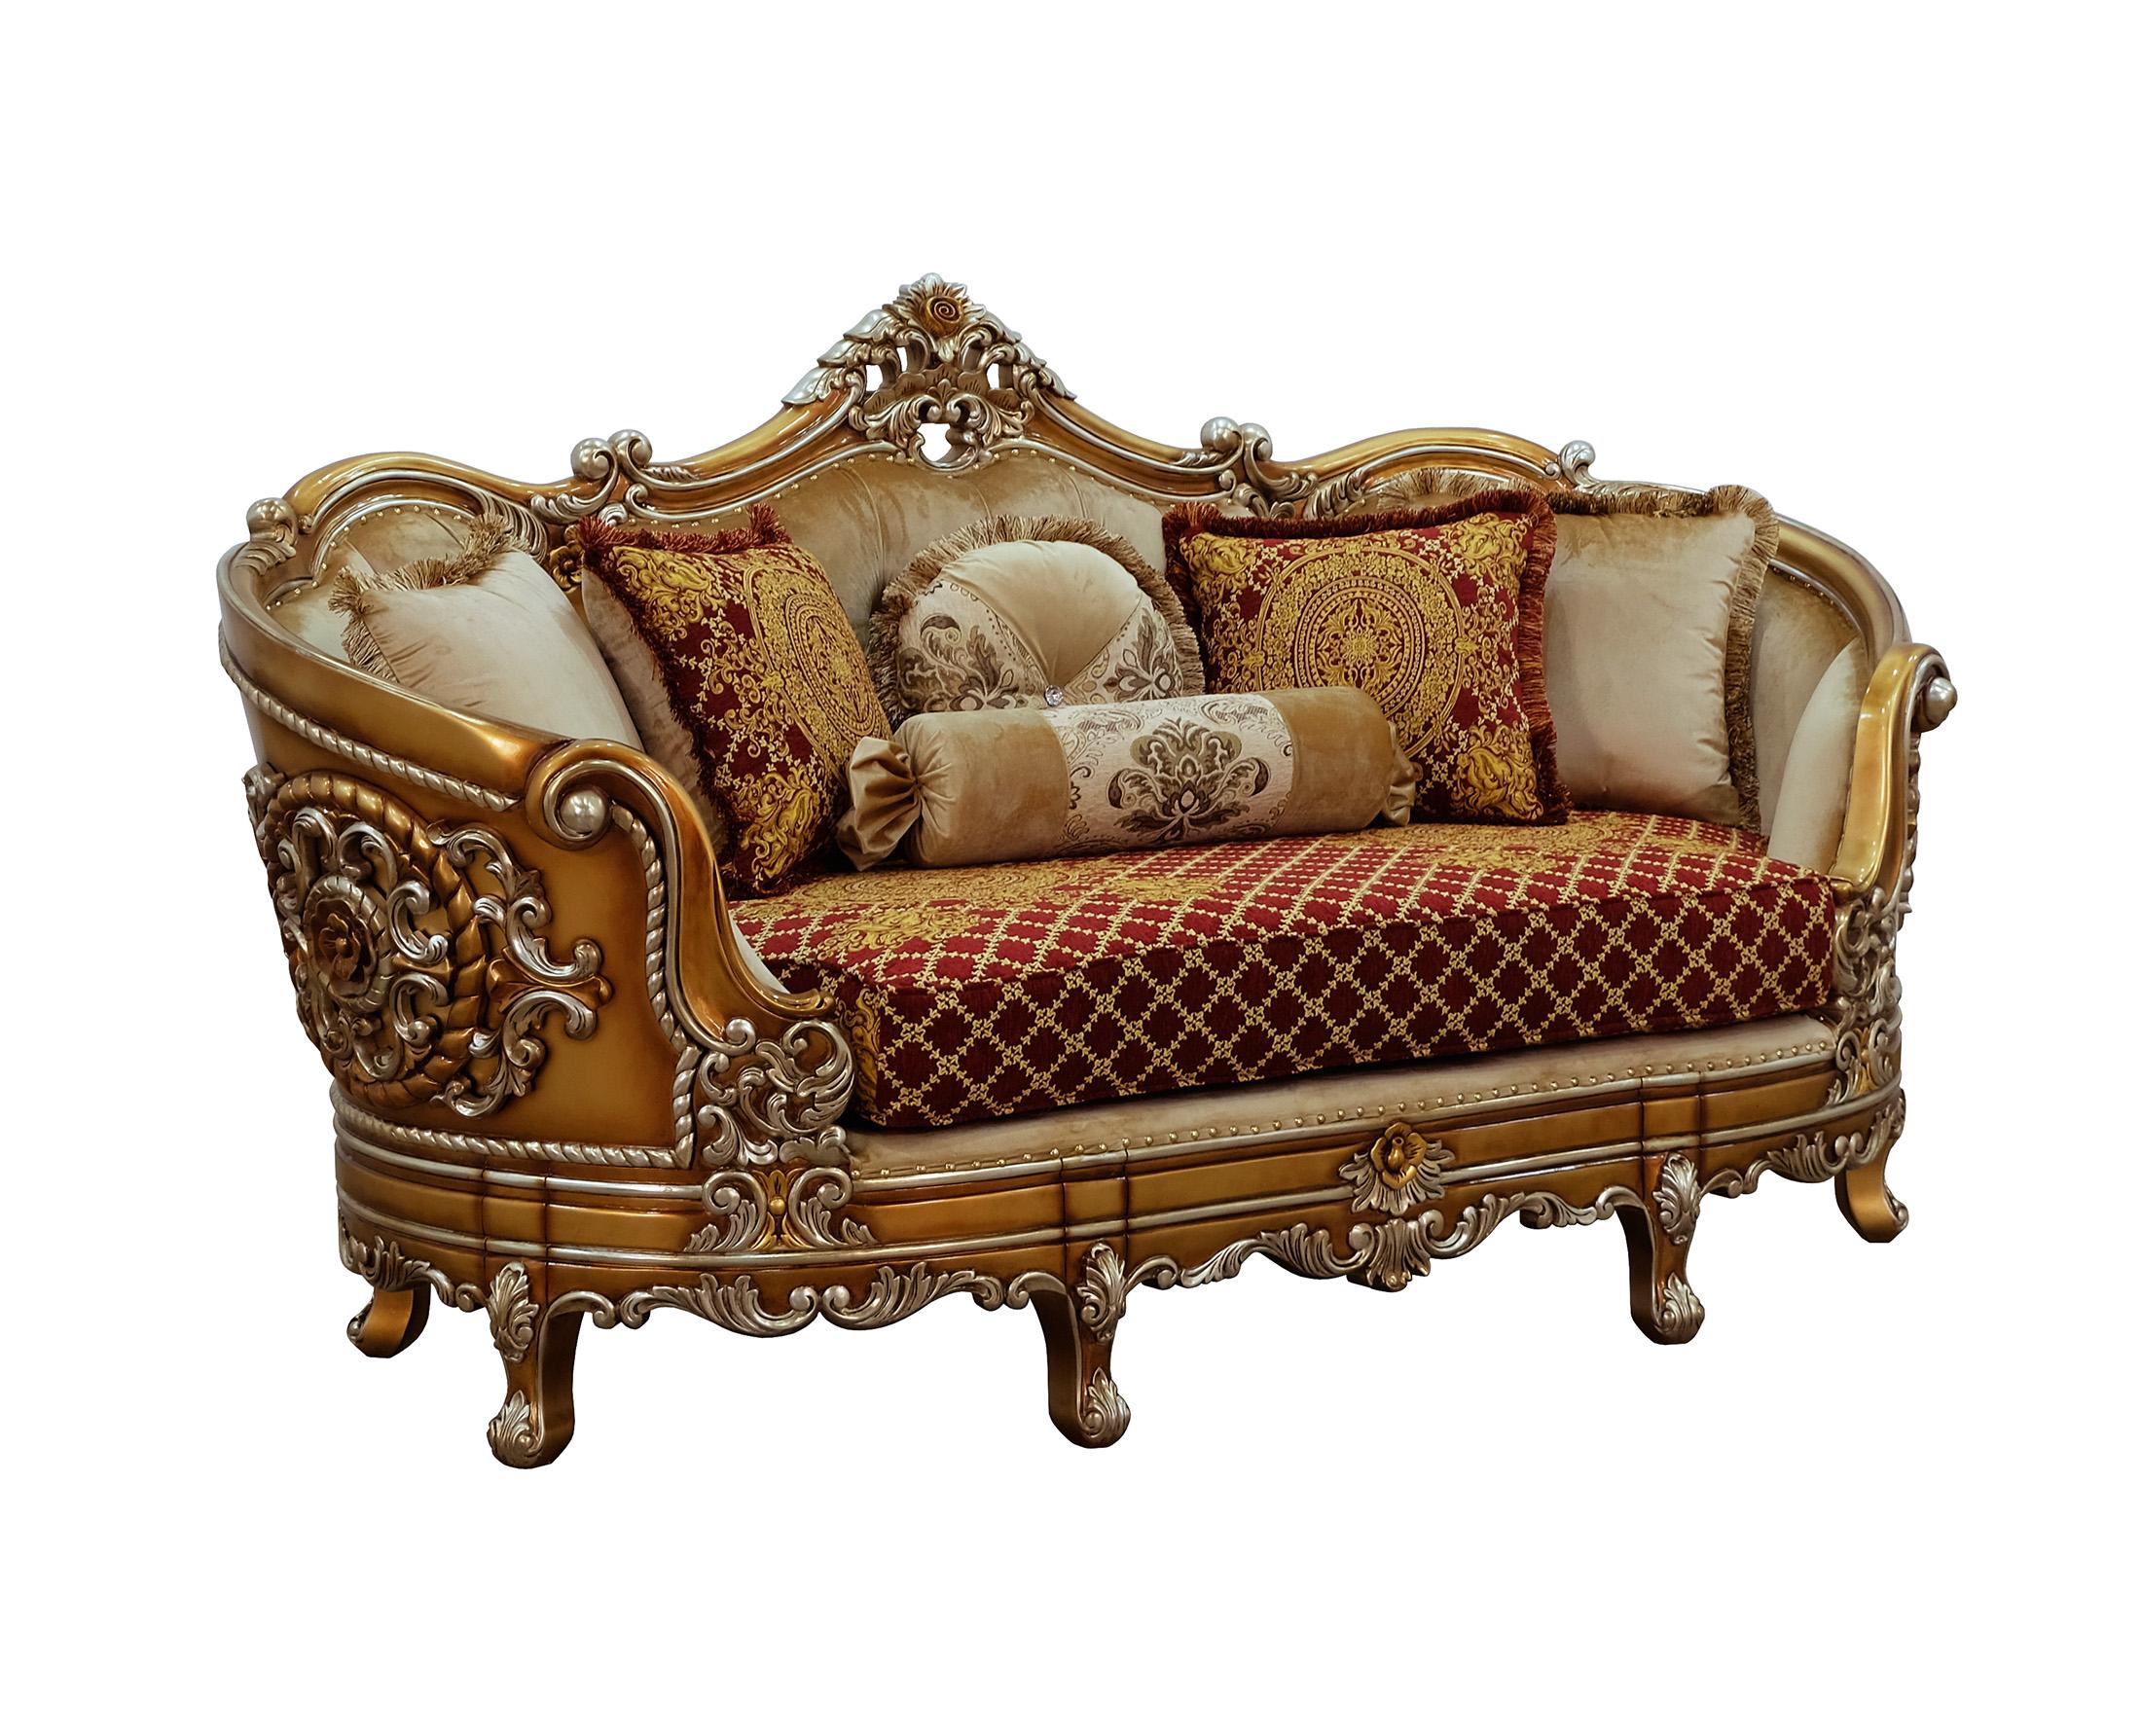 Classic, Traditional Loveseat SAINT GERMAIN 35554-L in Sand, Red, Gold Fabric